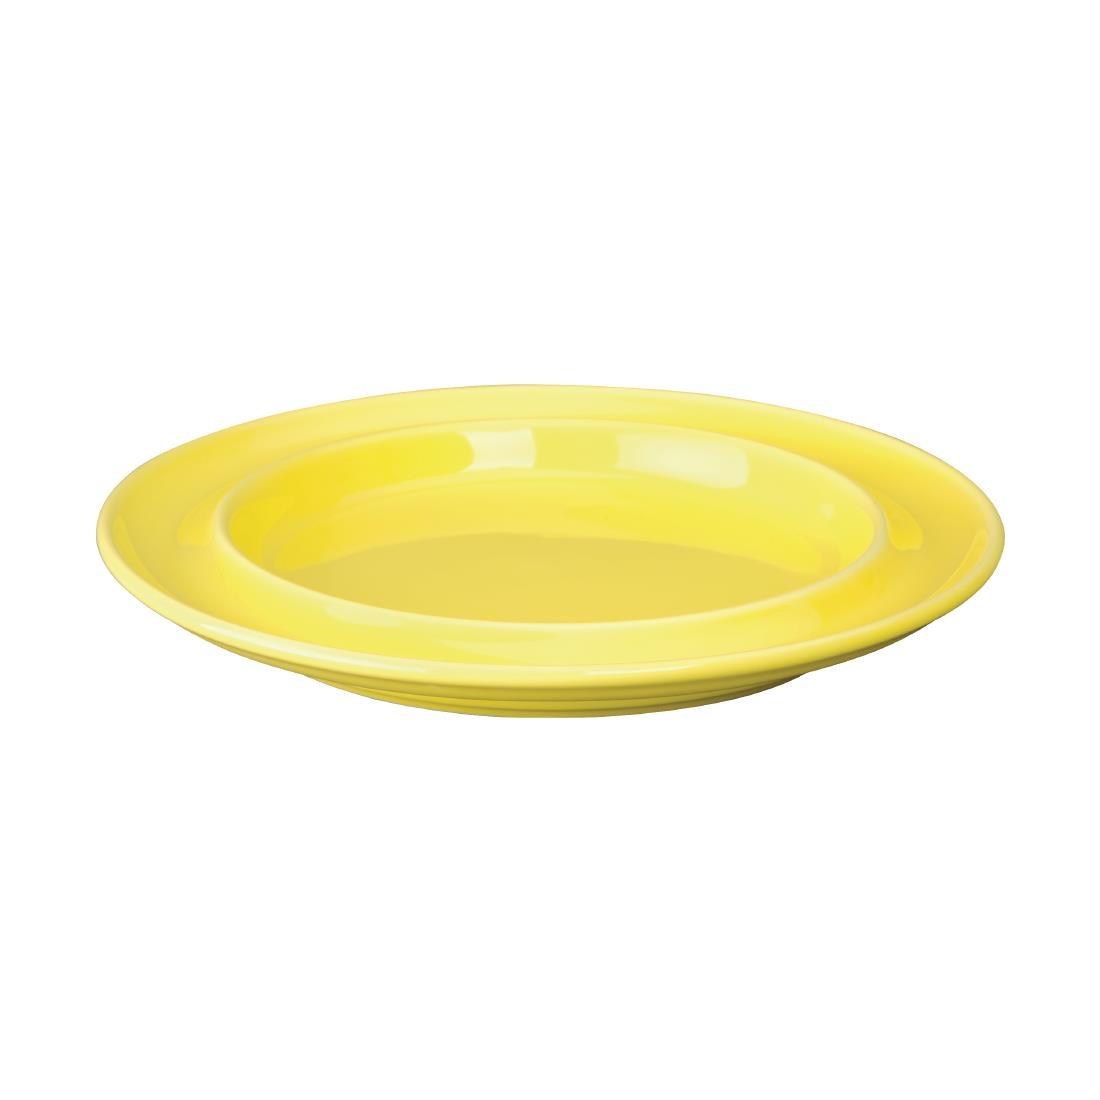 Olympia Heritage Raised Rim Plates Yellow 203mm (Pack of 4) - DW146  - 2